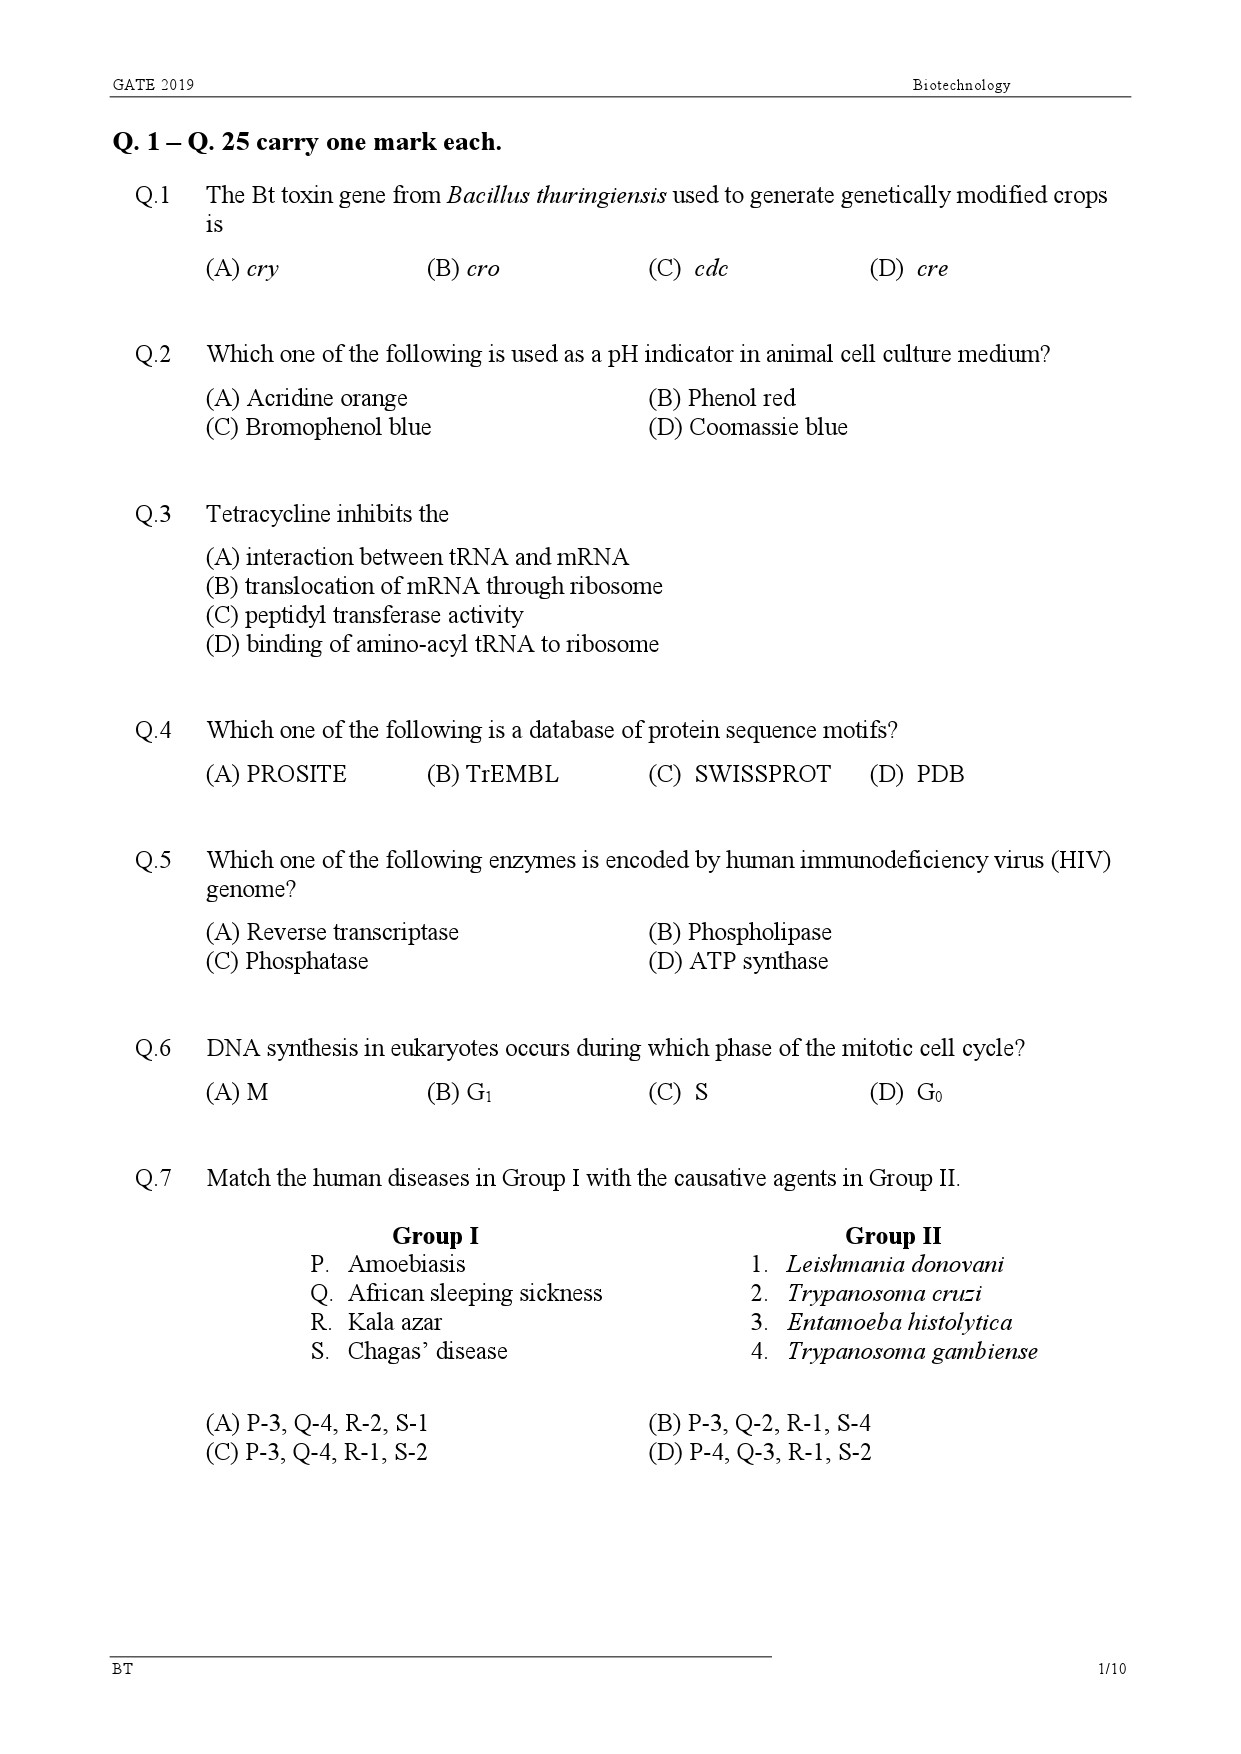 GATE Exam Question Paper 2019 Biotechnology 4